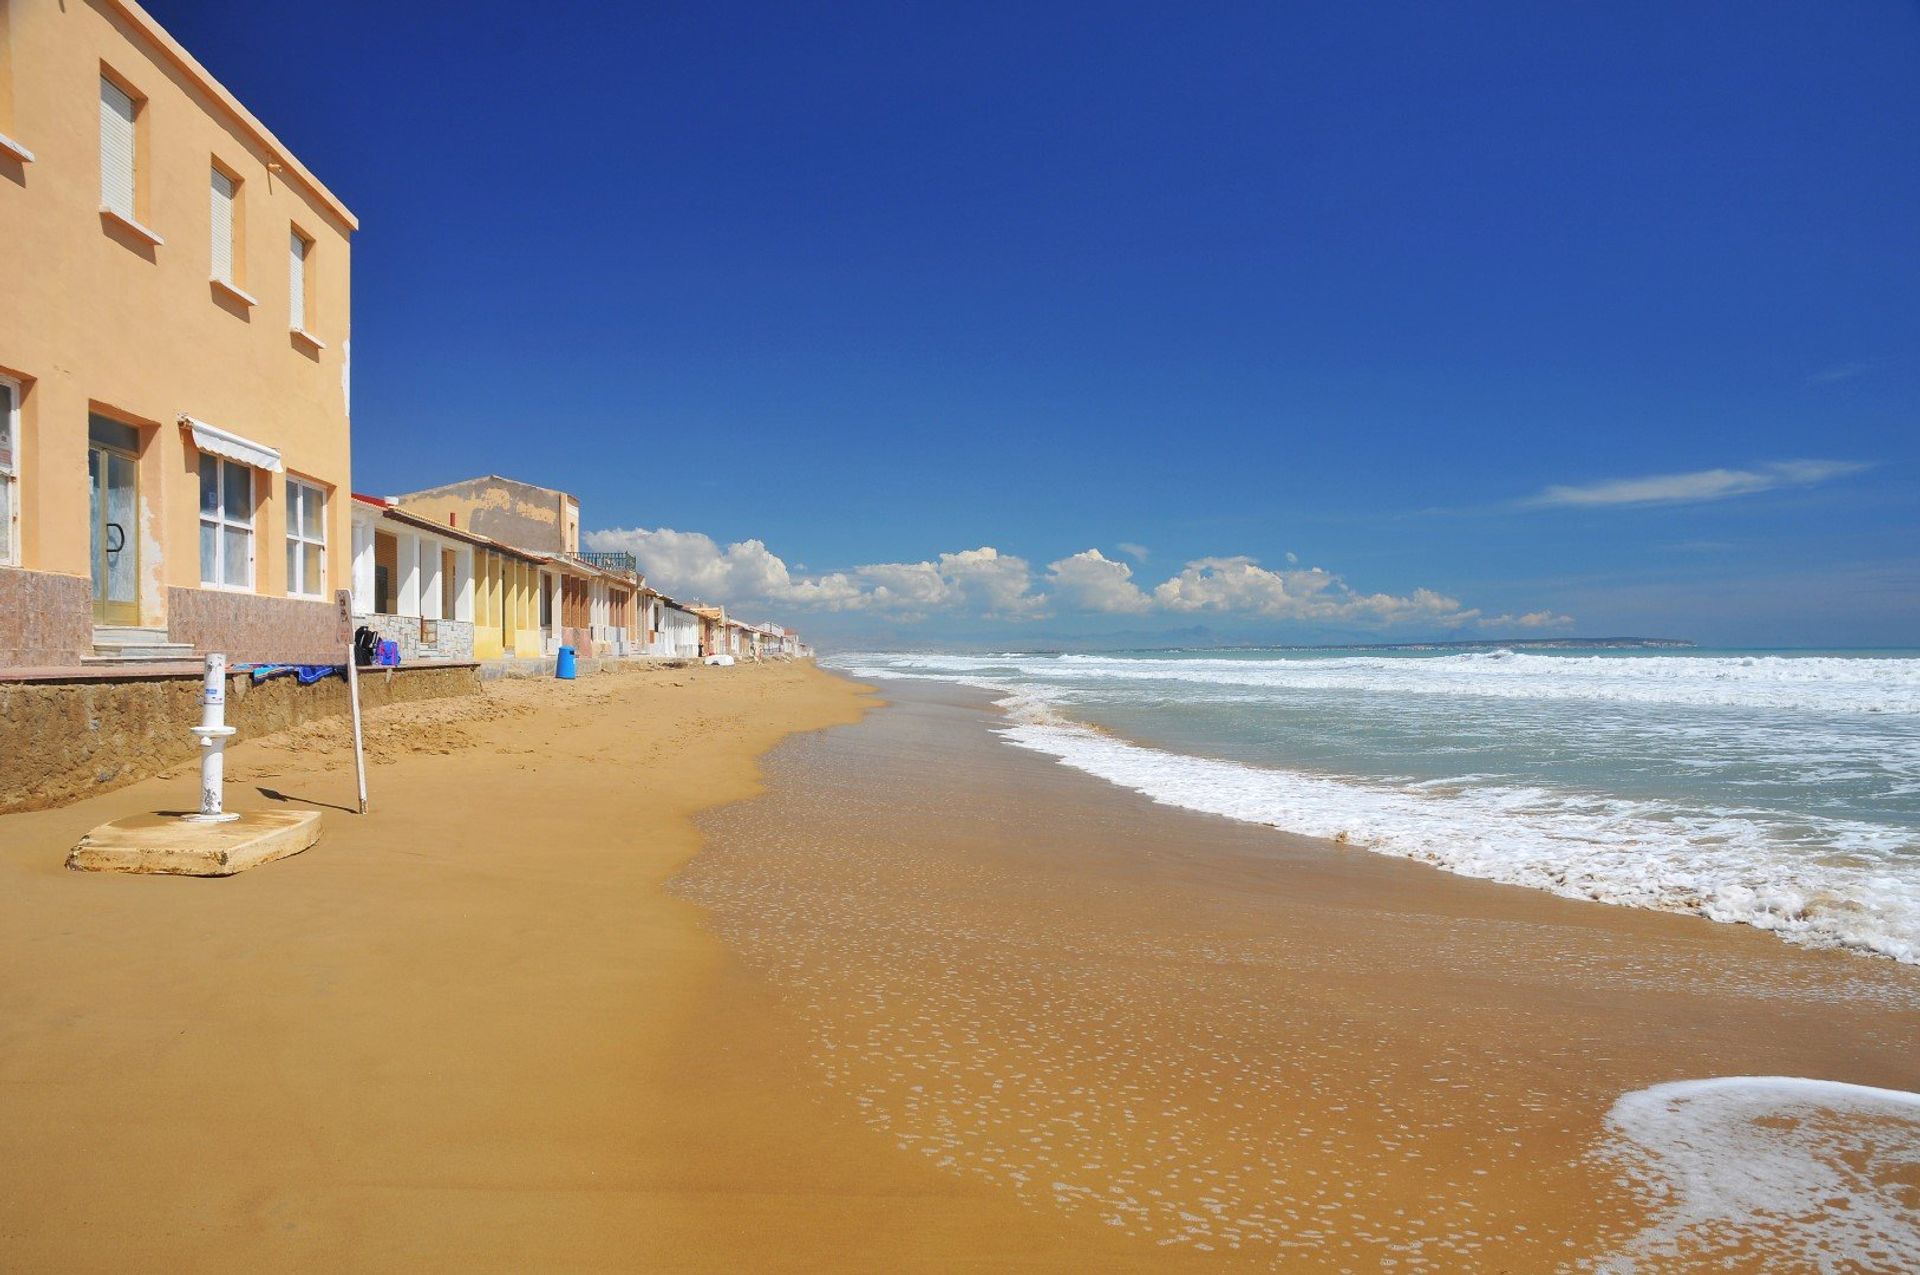 The golden sandy beaches in Guardamar del Segura are ideal for a fun day out with the family unwinding by the coast